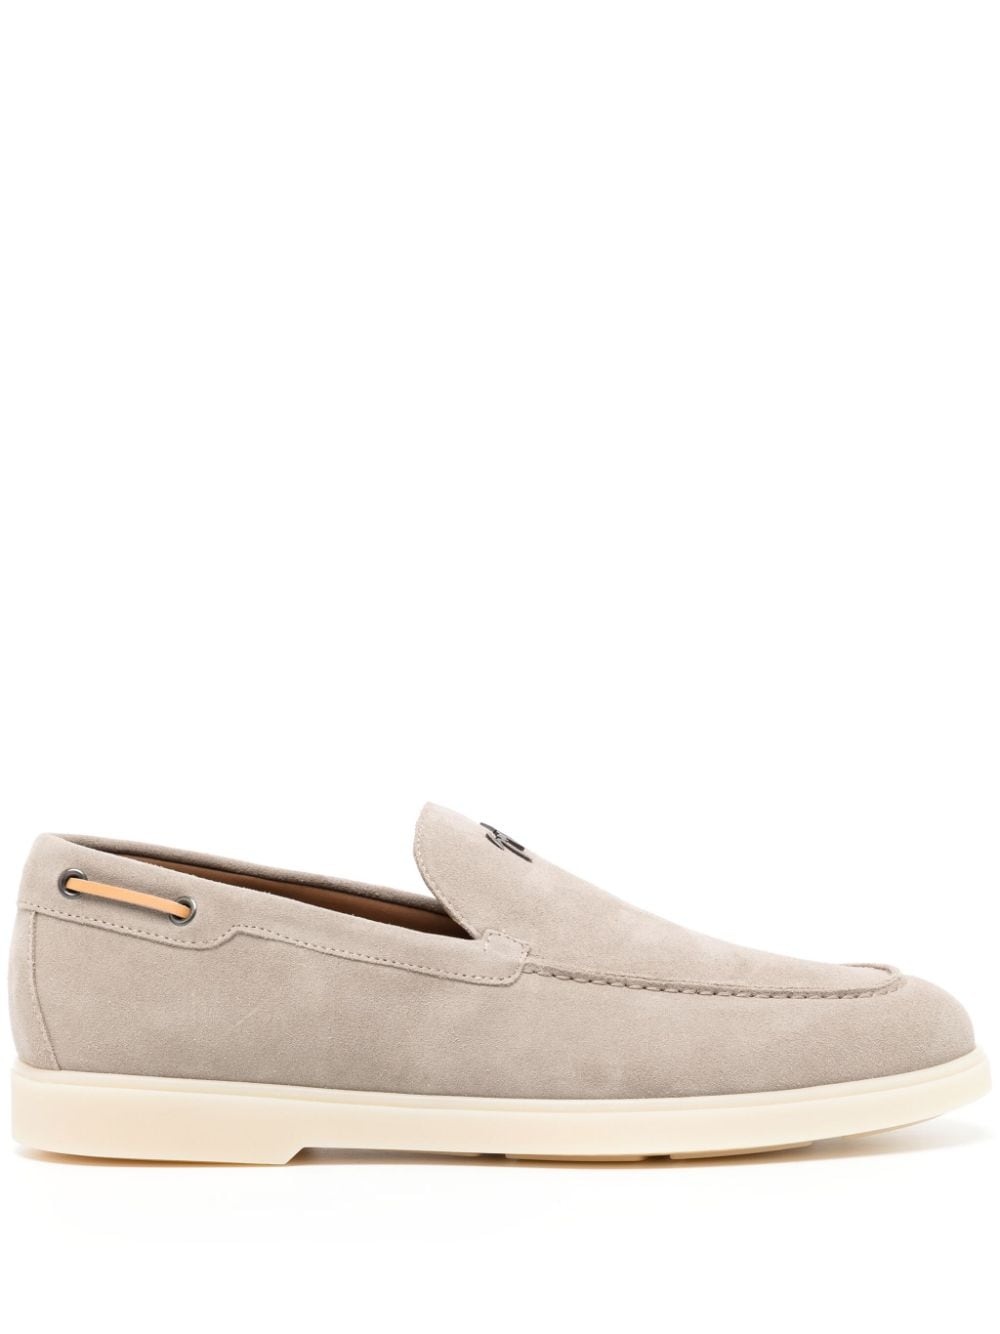 The Maui suede loafers - 1